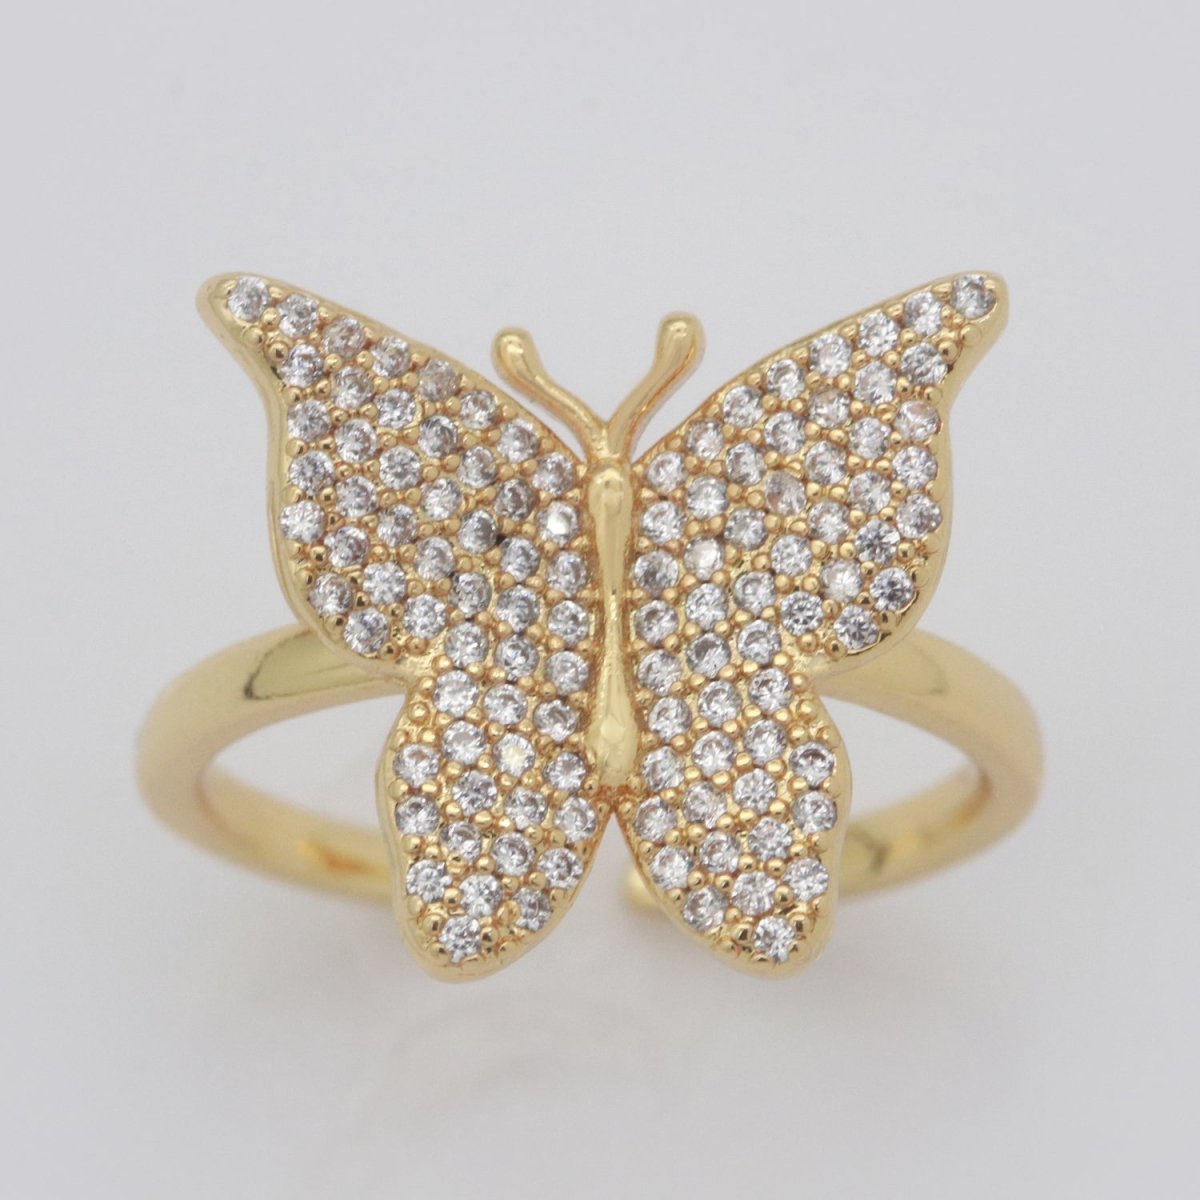 Dainty Butterfly Ring, Open Gold Adjustable Ring, Cute Mariposa Ring, Animal Lover Ring for Minimalist jewelry for Christmas Gift Idea S-160~S-164 - DLUXCA